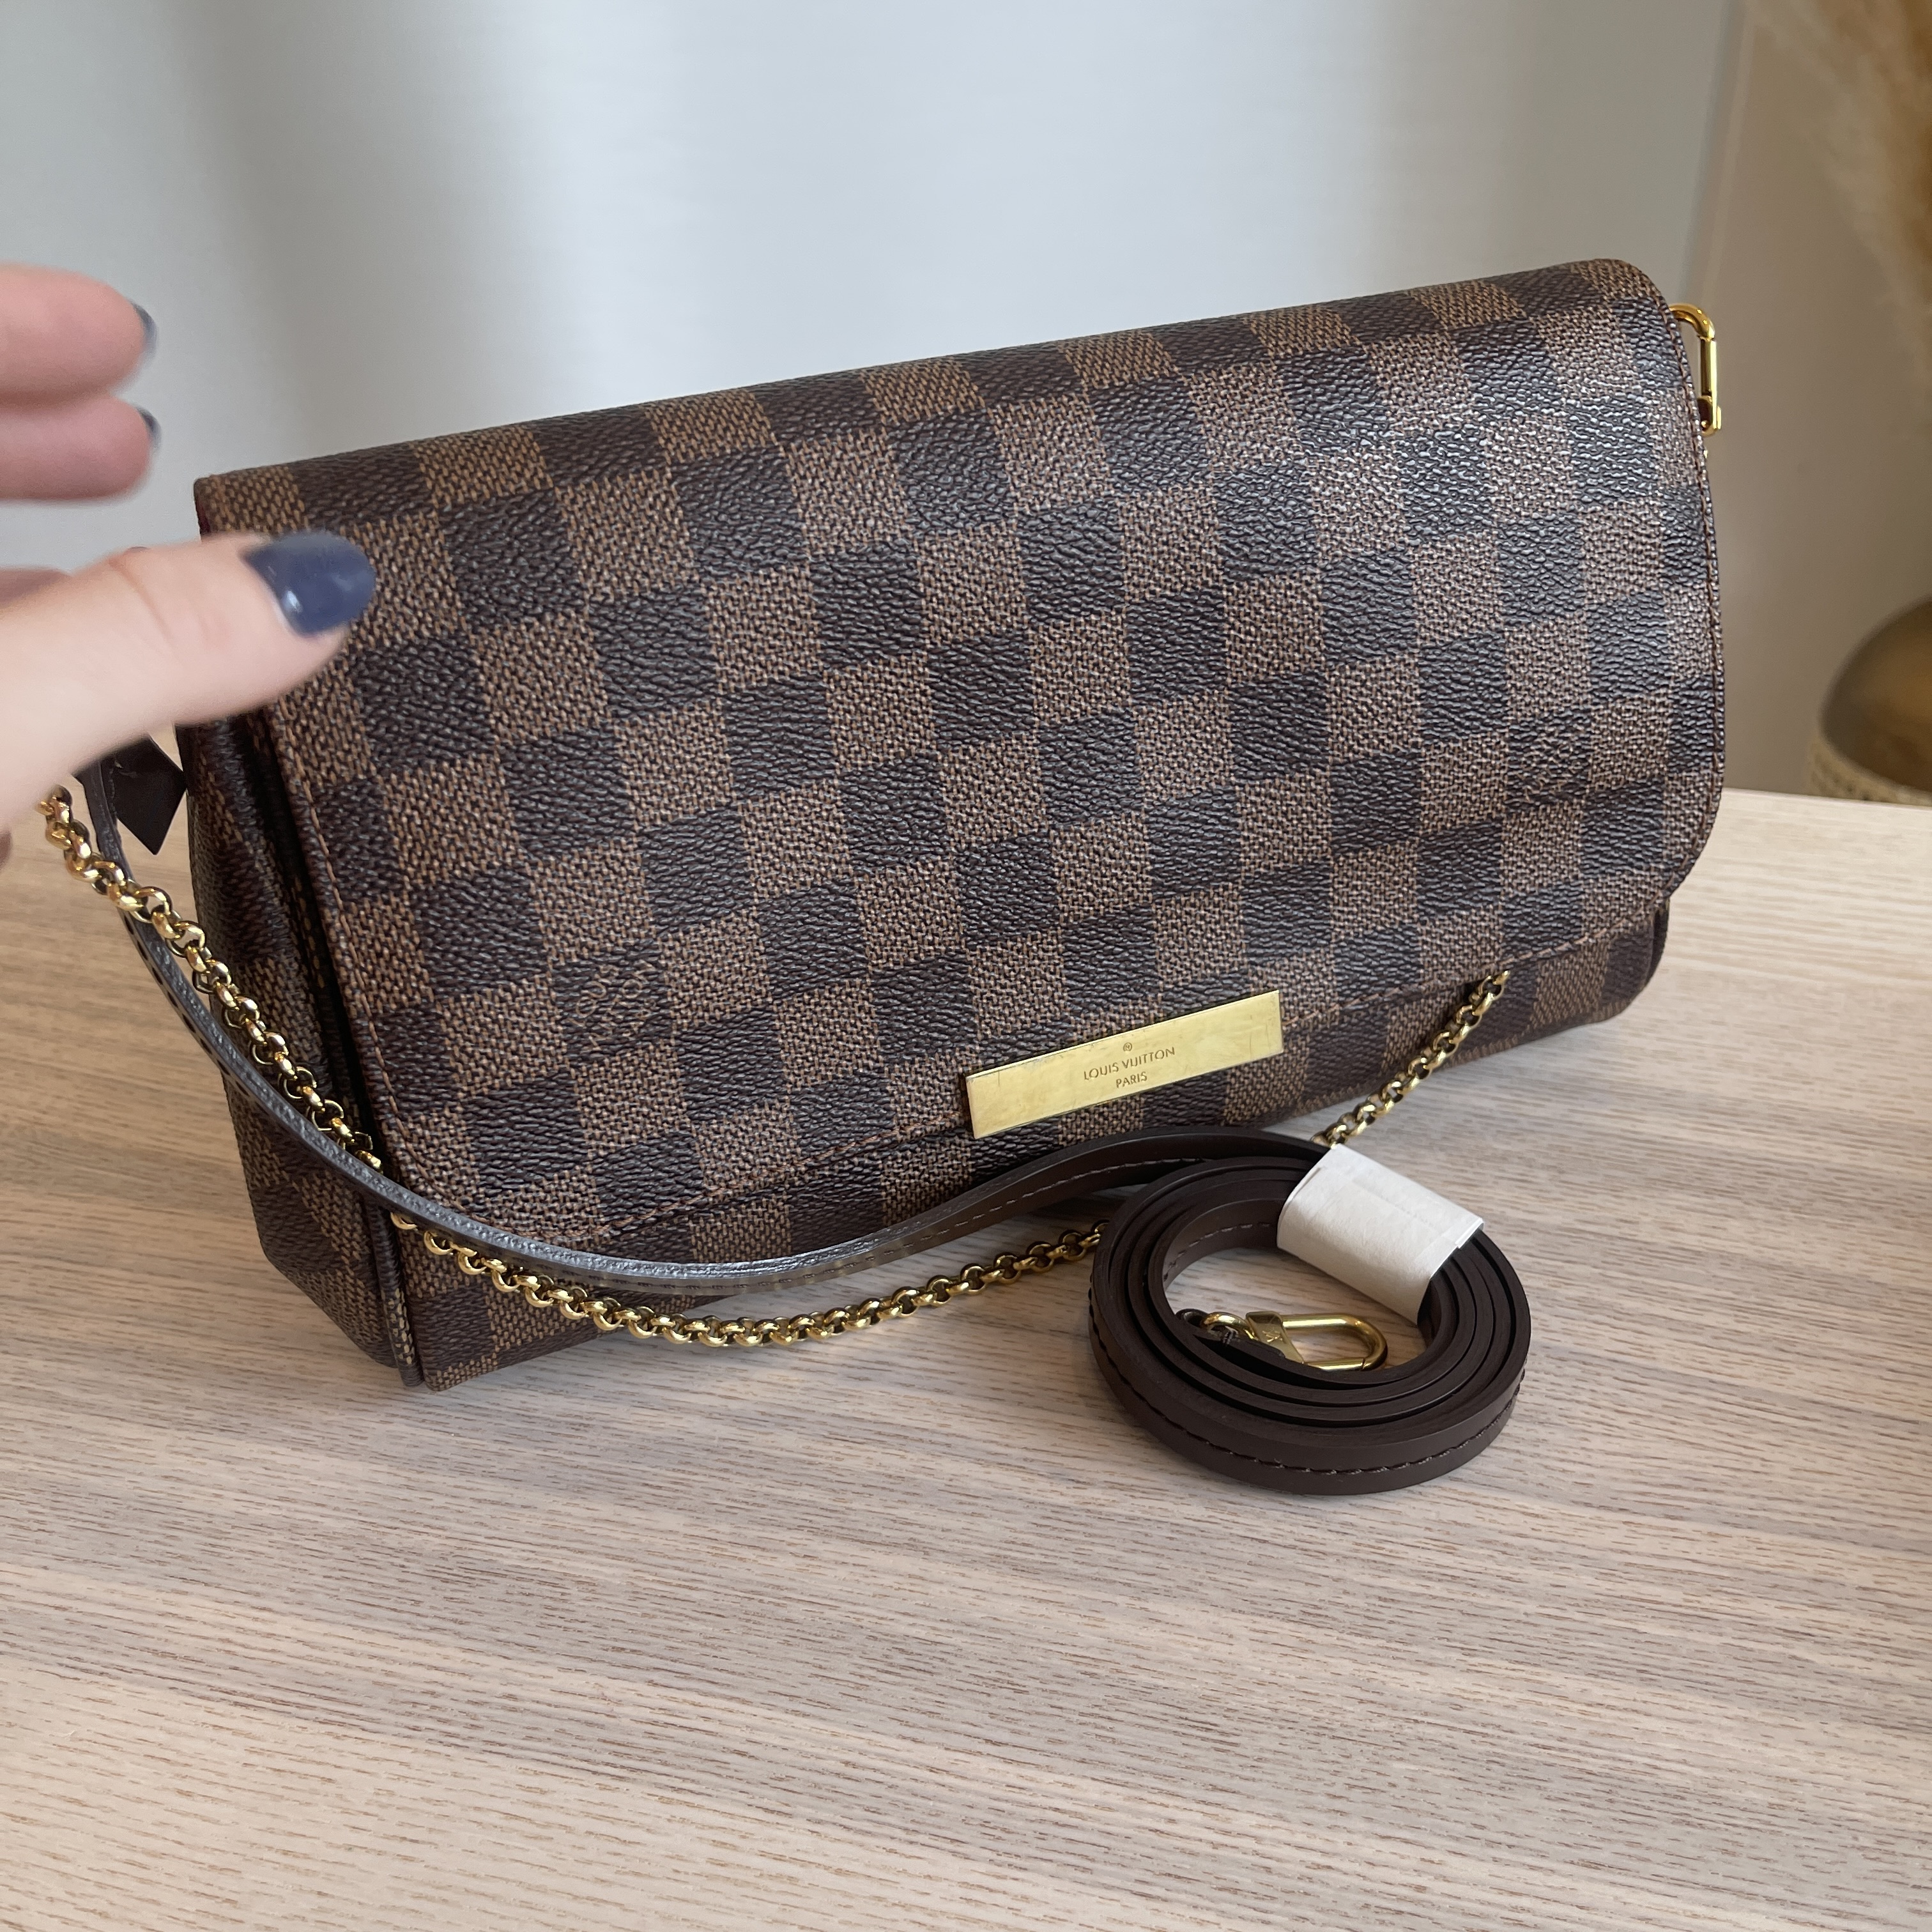 Destashing Hoarder - SOLD Louis Vuitton Favorite MM in damier ebene canvass  ❤️ The holiday packaging from LV is gorgeous! Still open for preorder. PM  size, and monogram / damier azur canvass